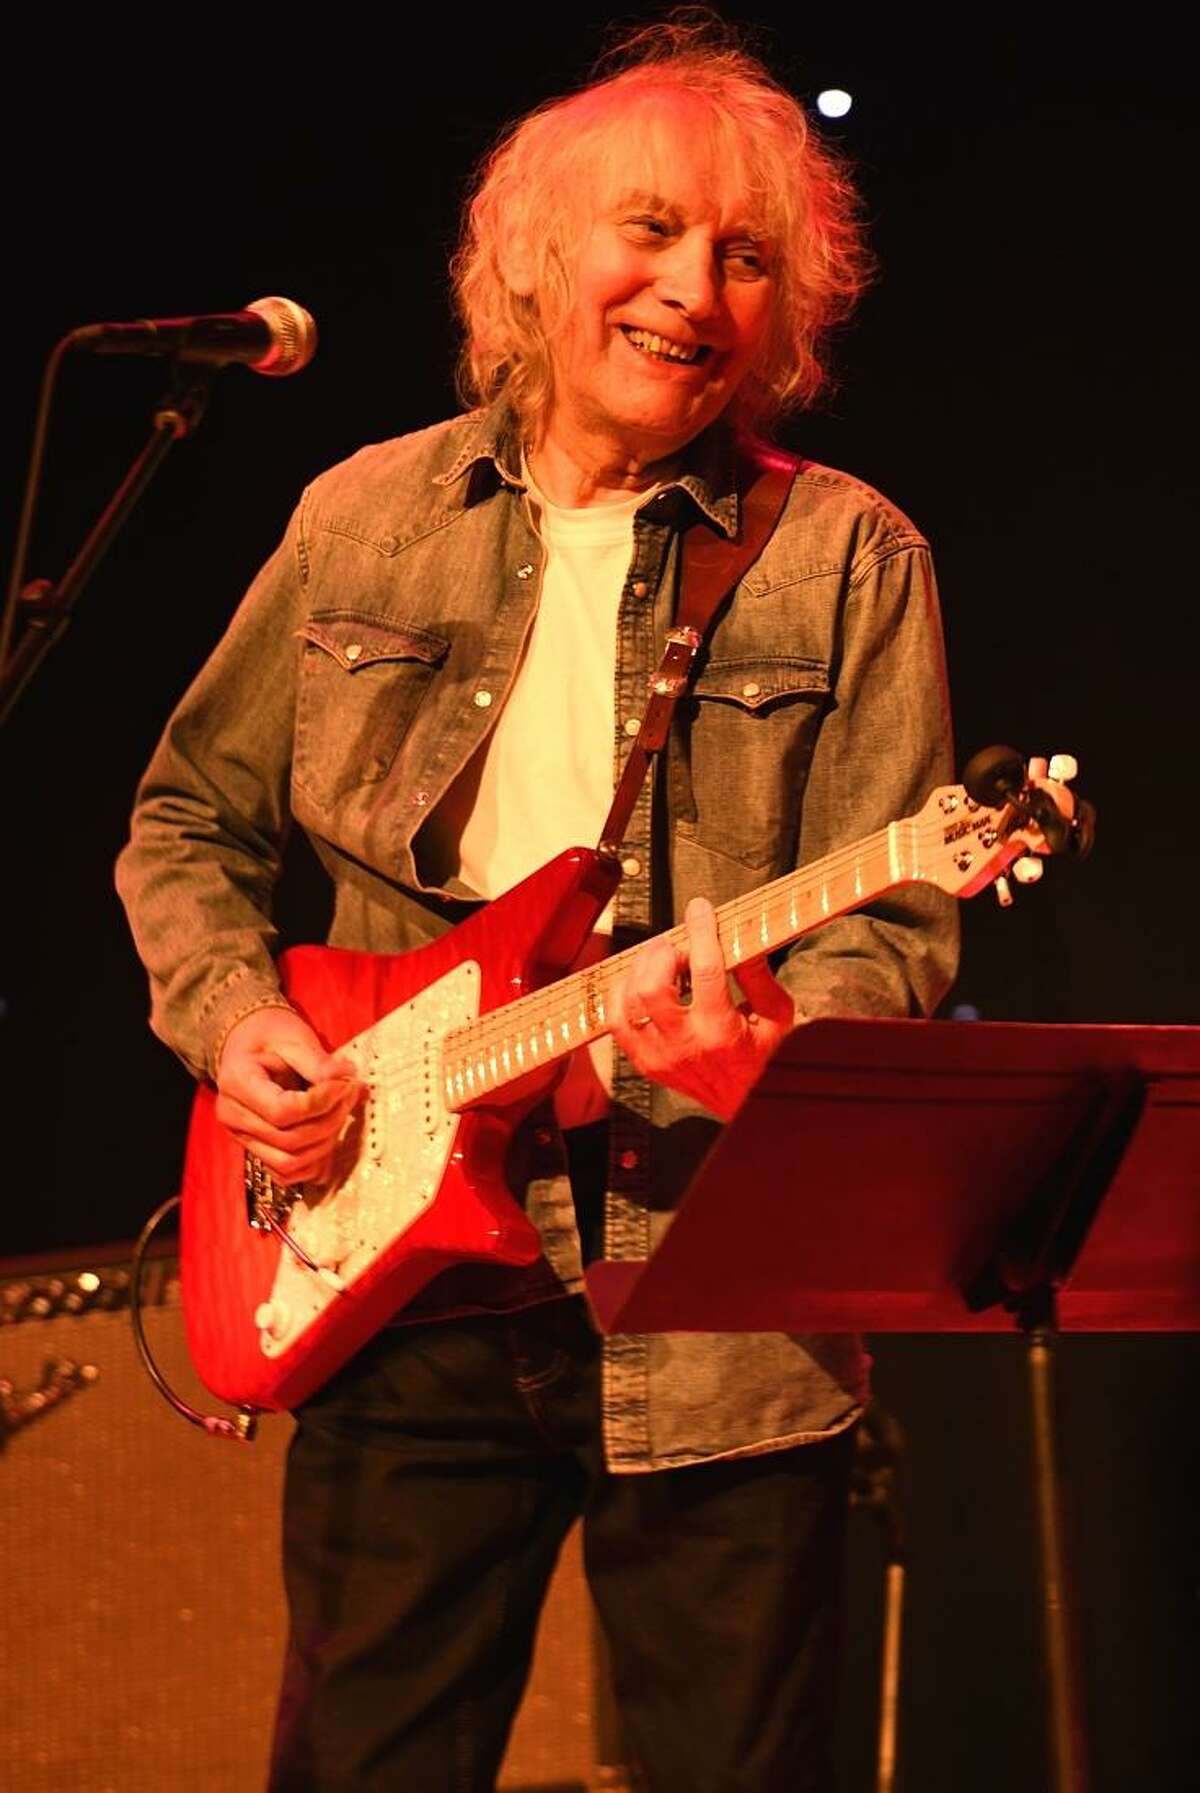 English guitarist Albert Lee is shown having fun onstage at the Infinity Music Hall in Hartford during his band's performance on Jan. 6. Lee has worked, both in the studio and on tour, with many of the worlds best musicians from a wide range of musical genres. He has also maintained a solo career and is known throughout the industry as a noted composer and musical director. In 2017, Lee was honored with the "Trailblazer Lifetime Achievement Award" at the UK Americana Awards. To learn more about Albert Lee you can visit www.albertlee.co.uk